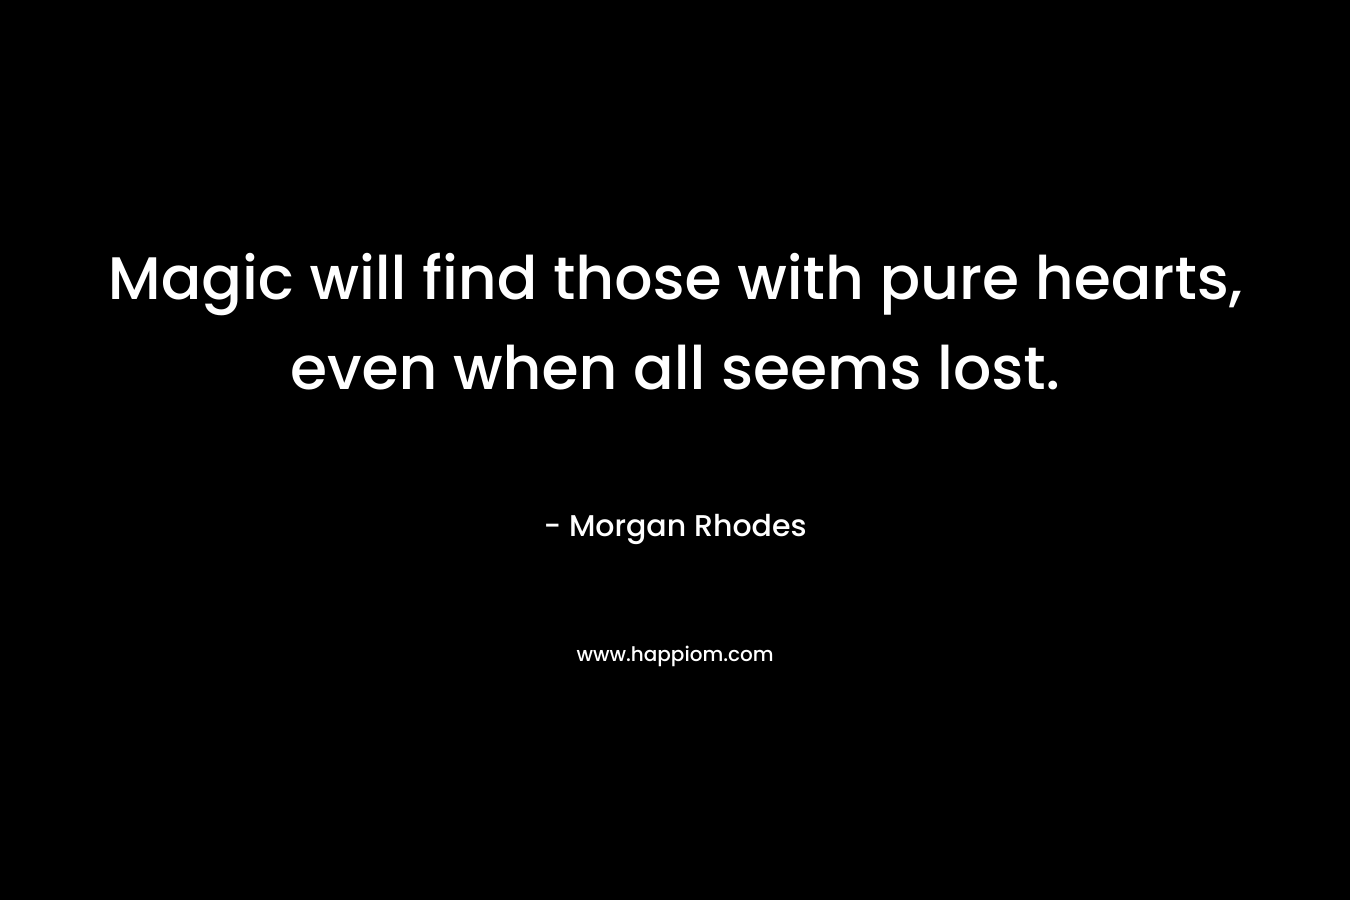 Magic will find those with pure hearts, even when all seems lost.